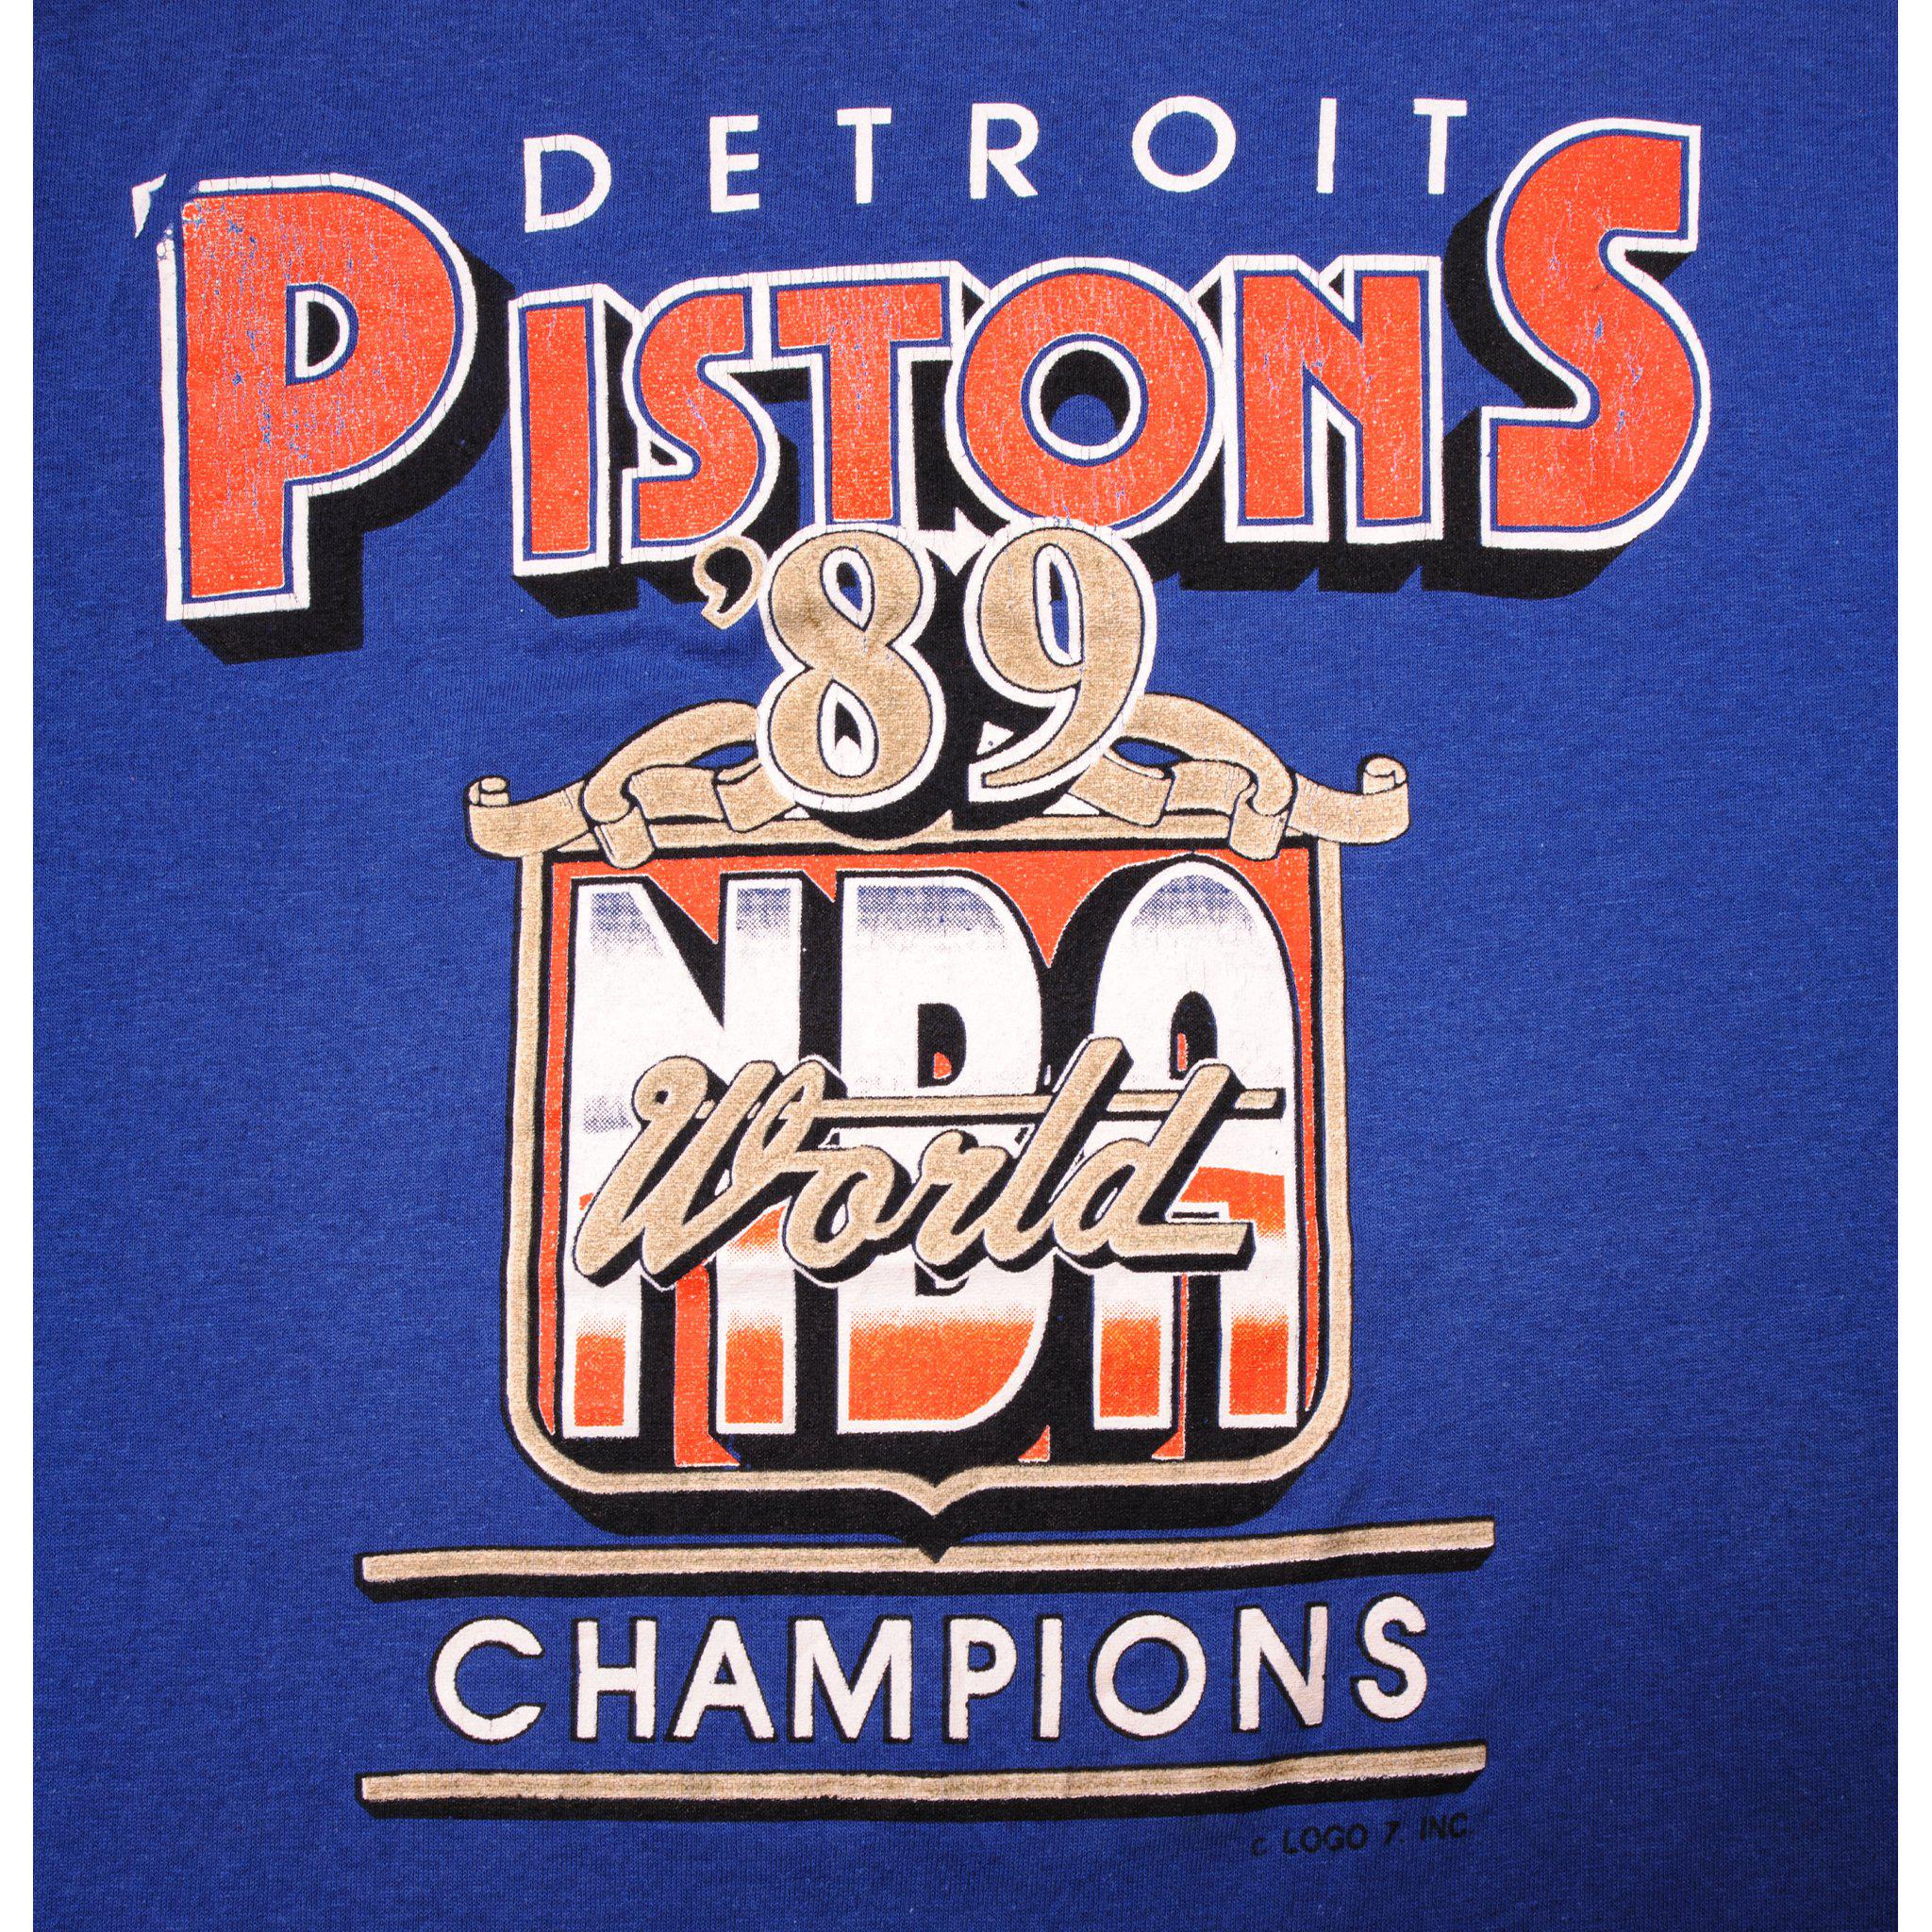 Sports / College Vintage NBA Detroit Pistons World Champions Tee Shirt 1990 Size XL Made in USA